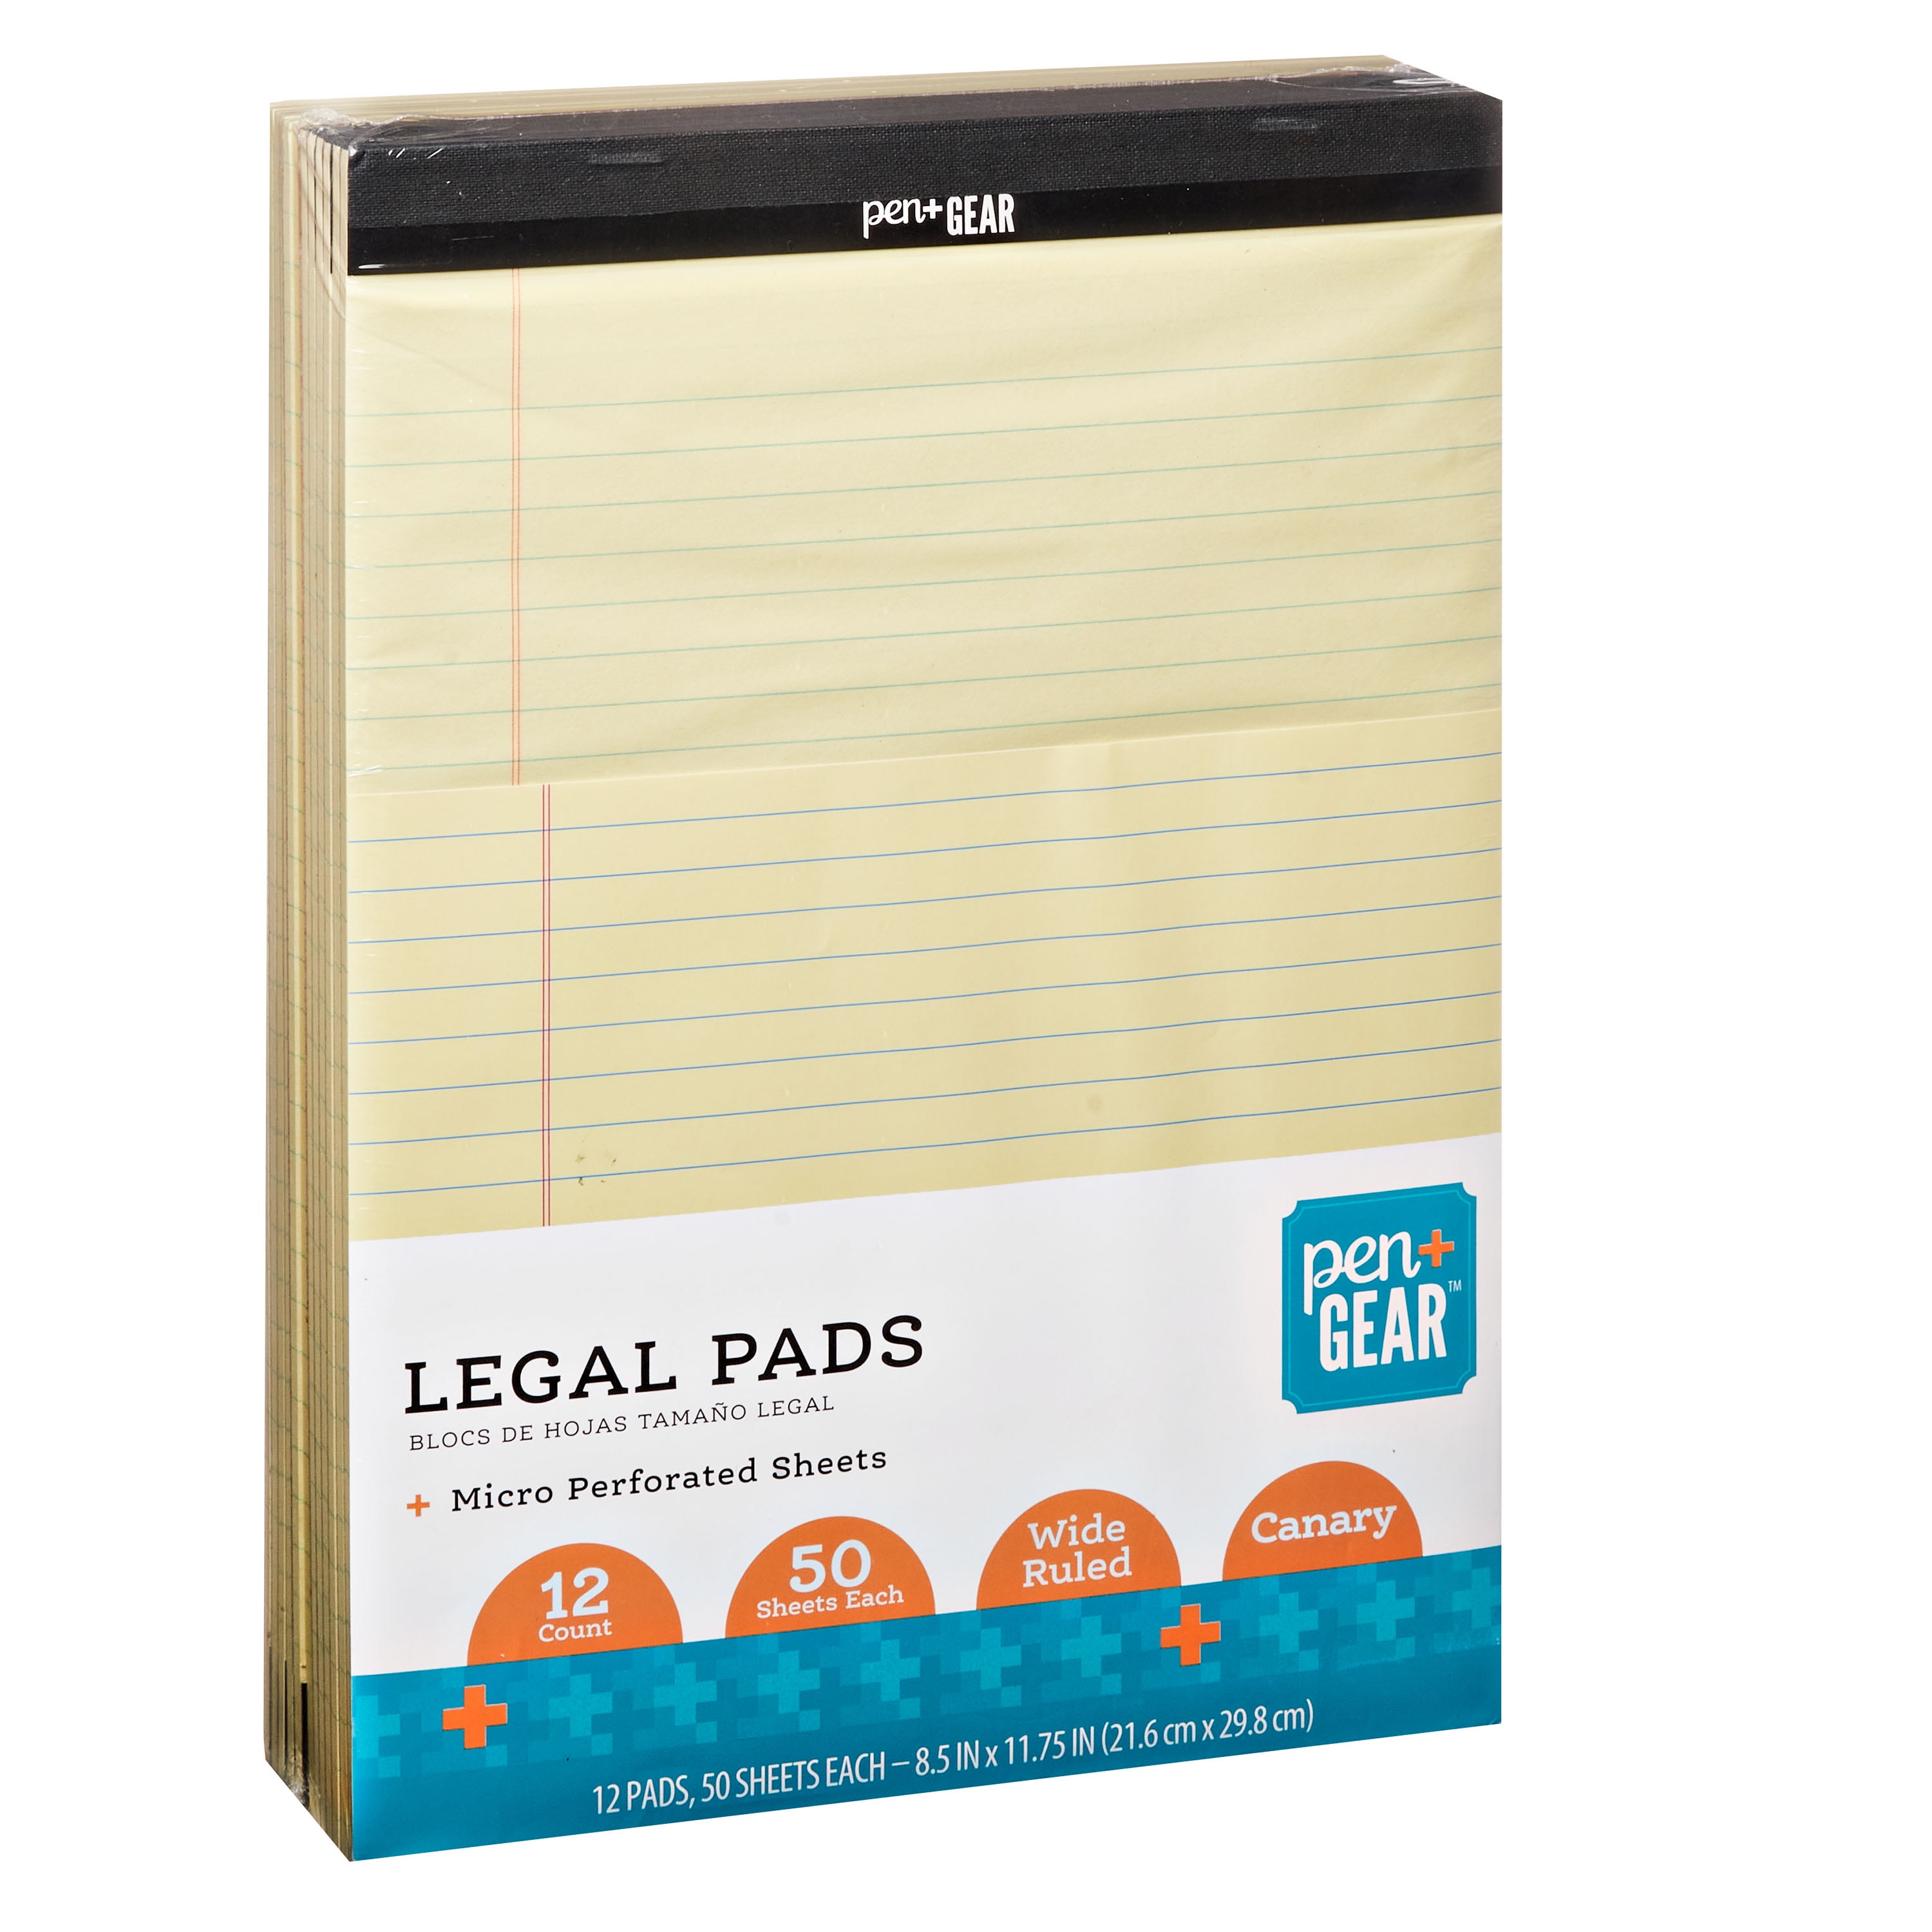 Staples Junior Size Perforated Legal Pad Narrow Ruled Canary  5" x 8" 12-Pack 